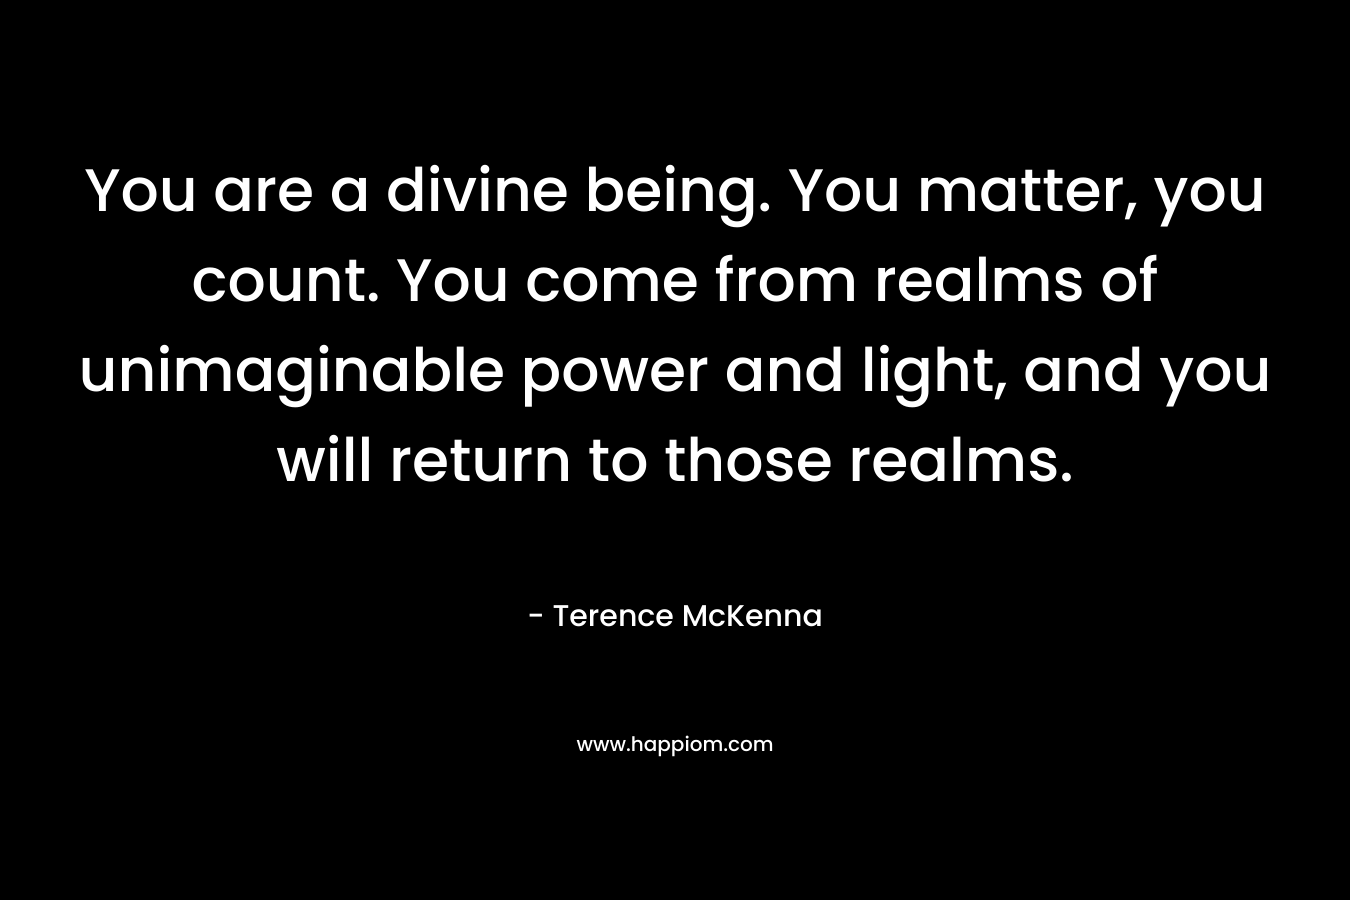 You are a divine being. You matter, you count. You come from realms of unimaginable power and light, and you will return to those realms. – Terence McKenna